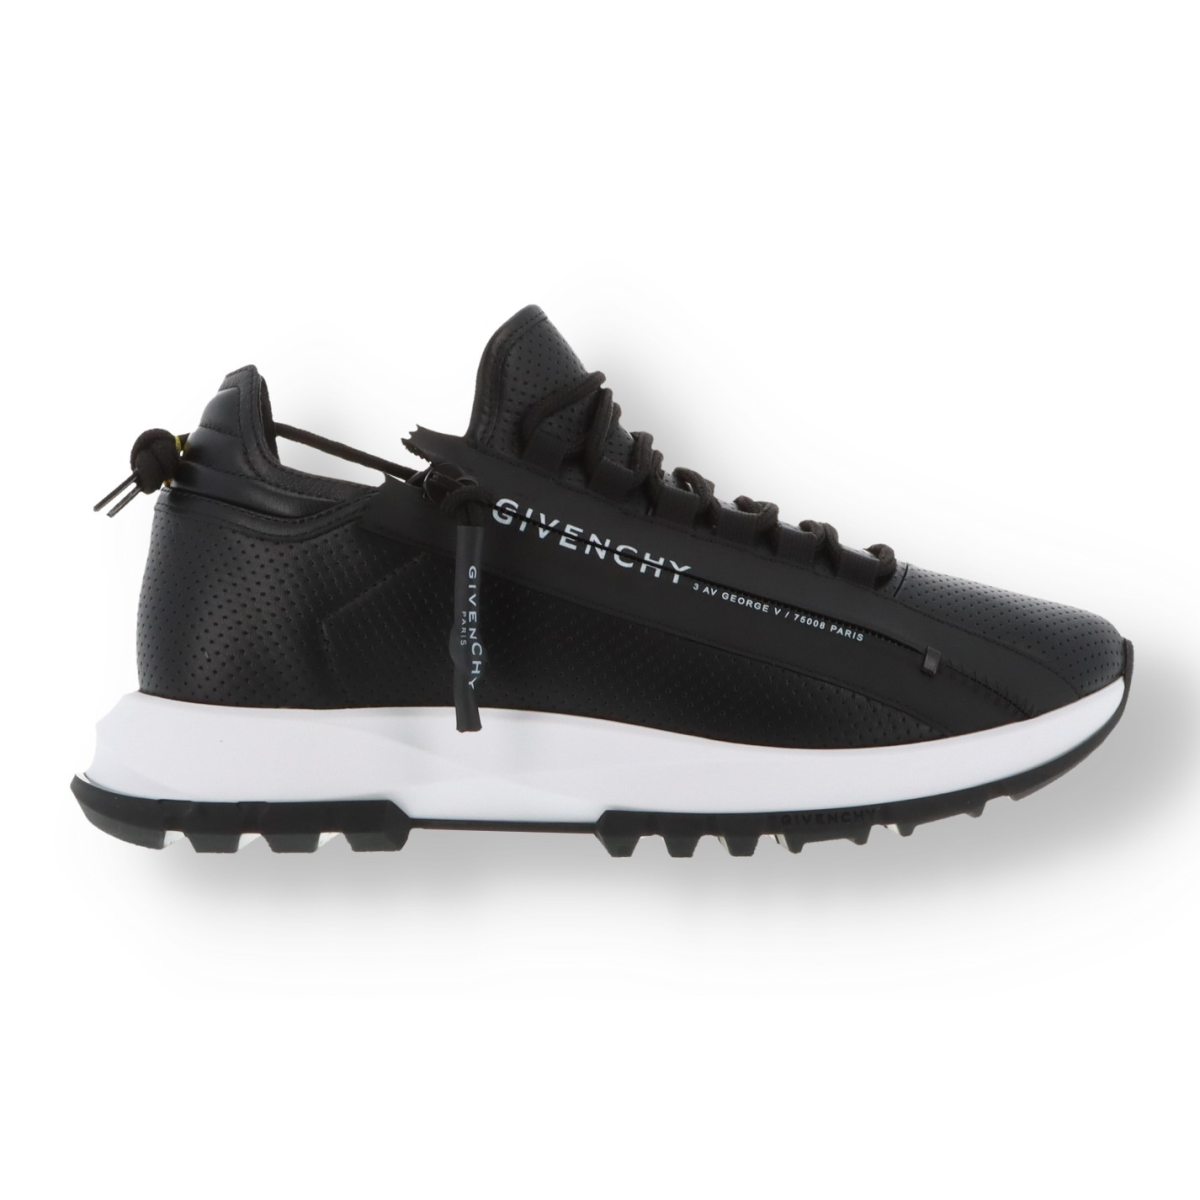 Givenchy Spectre Sneakers